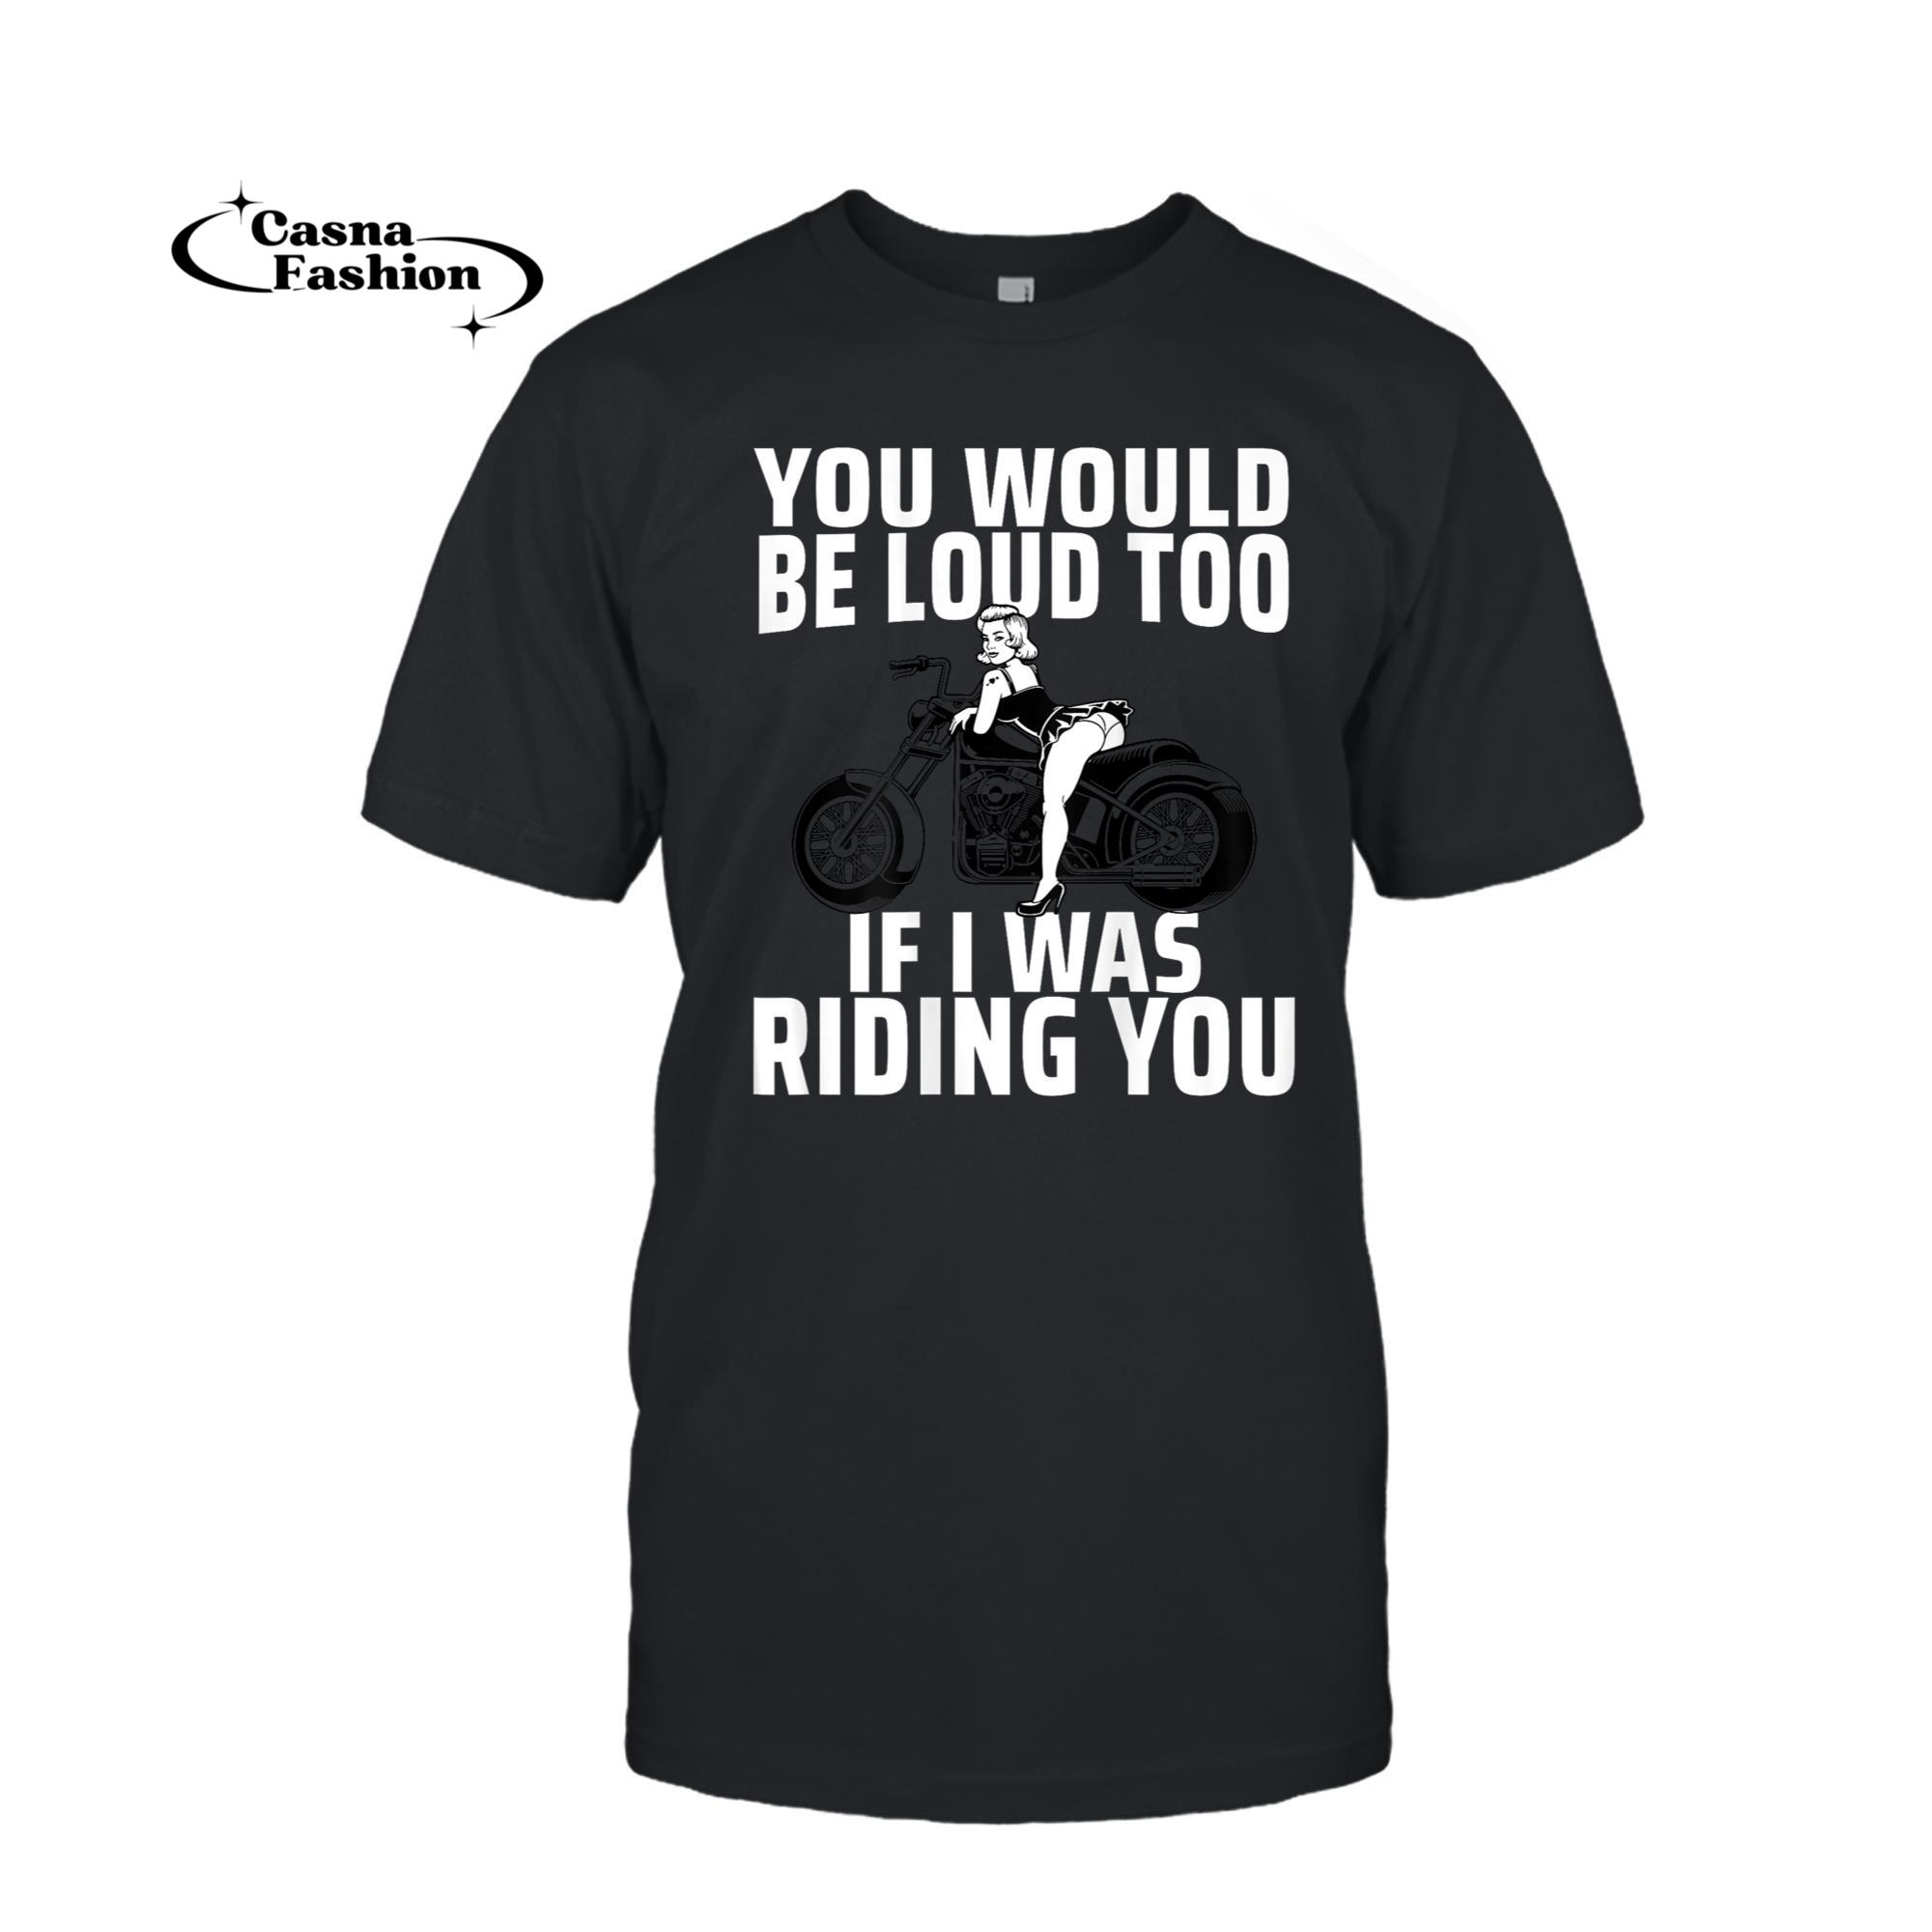 casnafashion_T-shirt_You Would Be Loud Too If I Was Riding You (on back) T-Shirt_T-shirt_Black